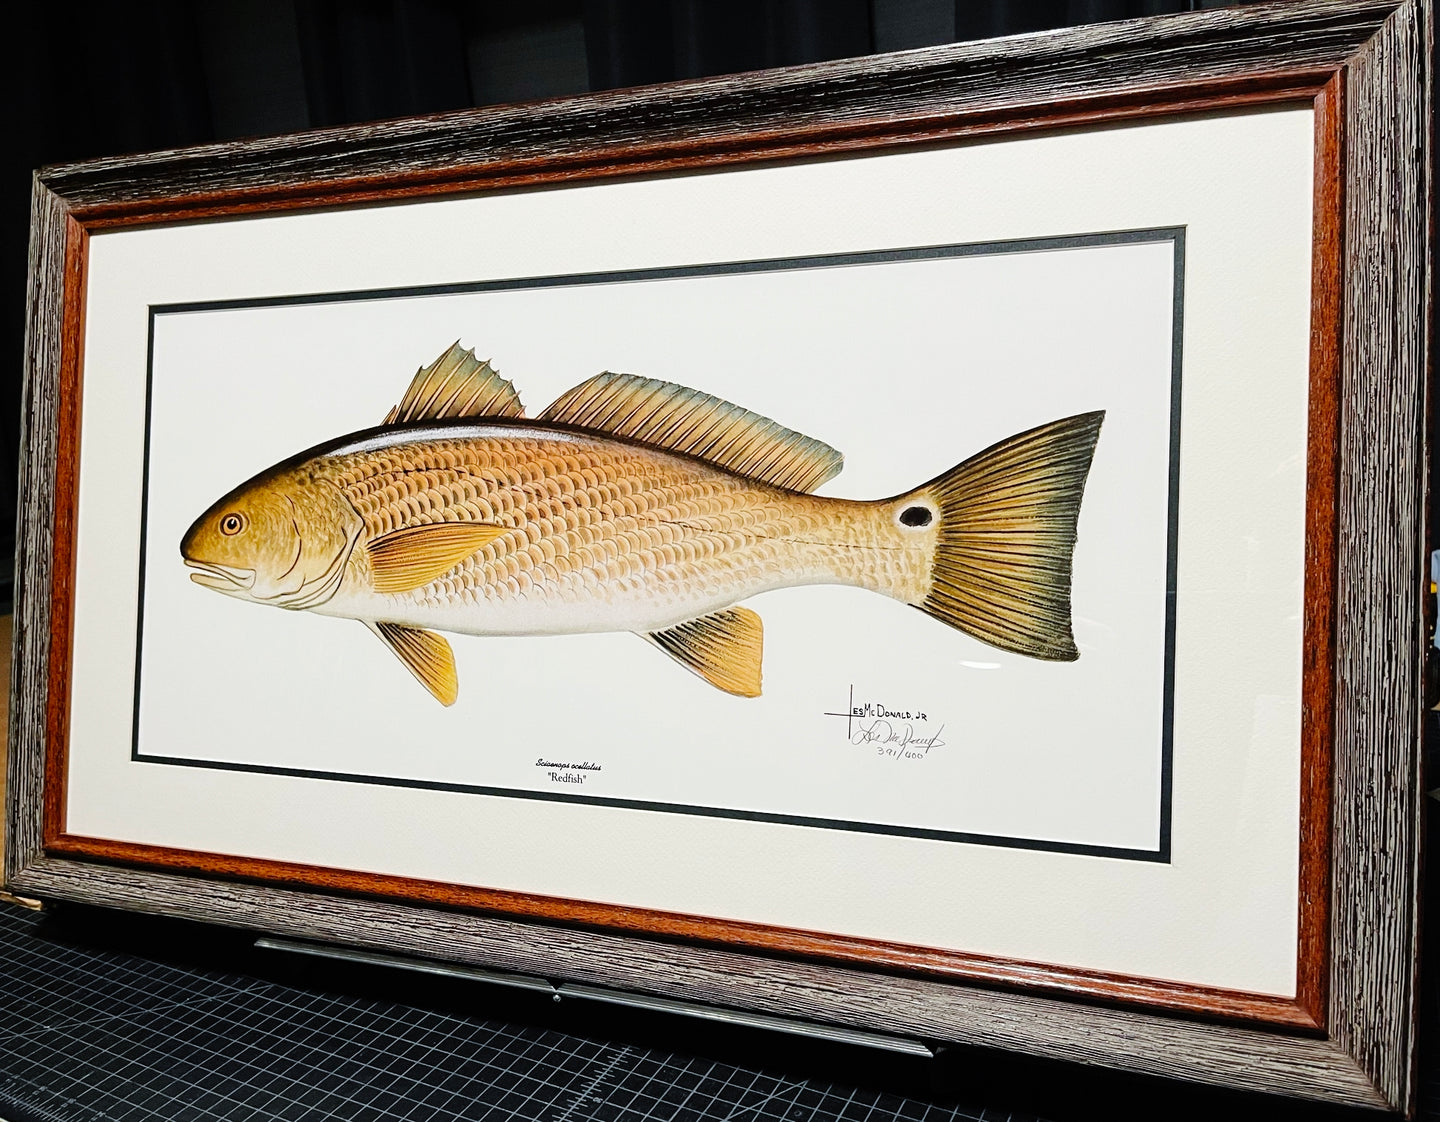 Les McDonald - Redfish - Lithograph - Brand New Custom Sporting Frame  ***  FALL SPECIAL  ***